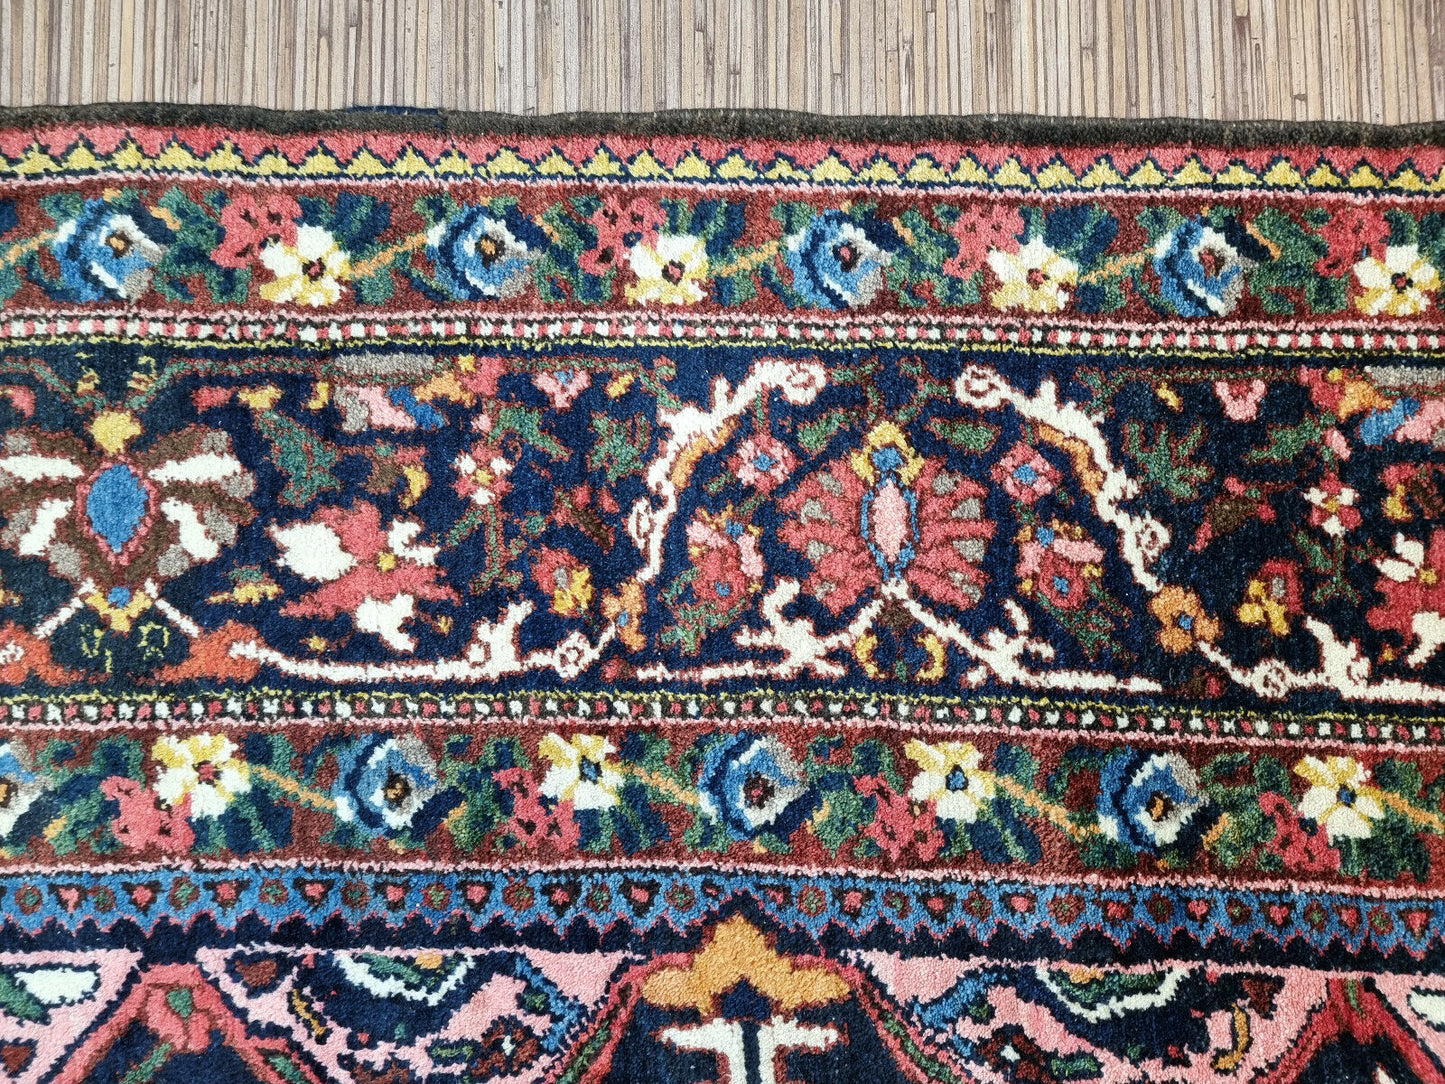 Close-up of geometric patterns on Handmade Antique Persian Bakhtiari Rug - Detailed view showcasing the geometric patterns that adorn the rug.